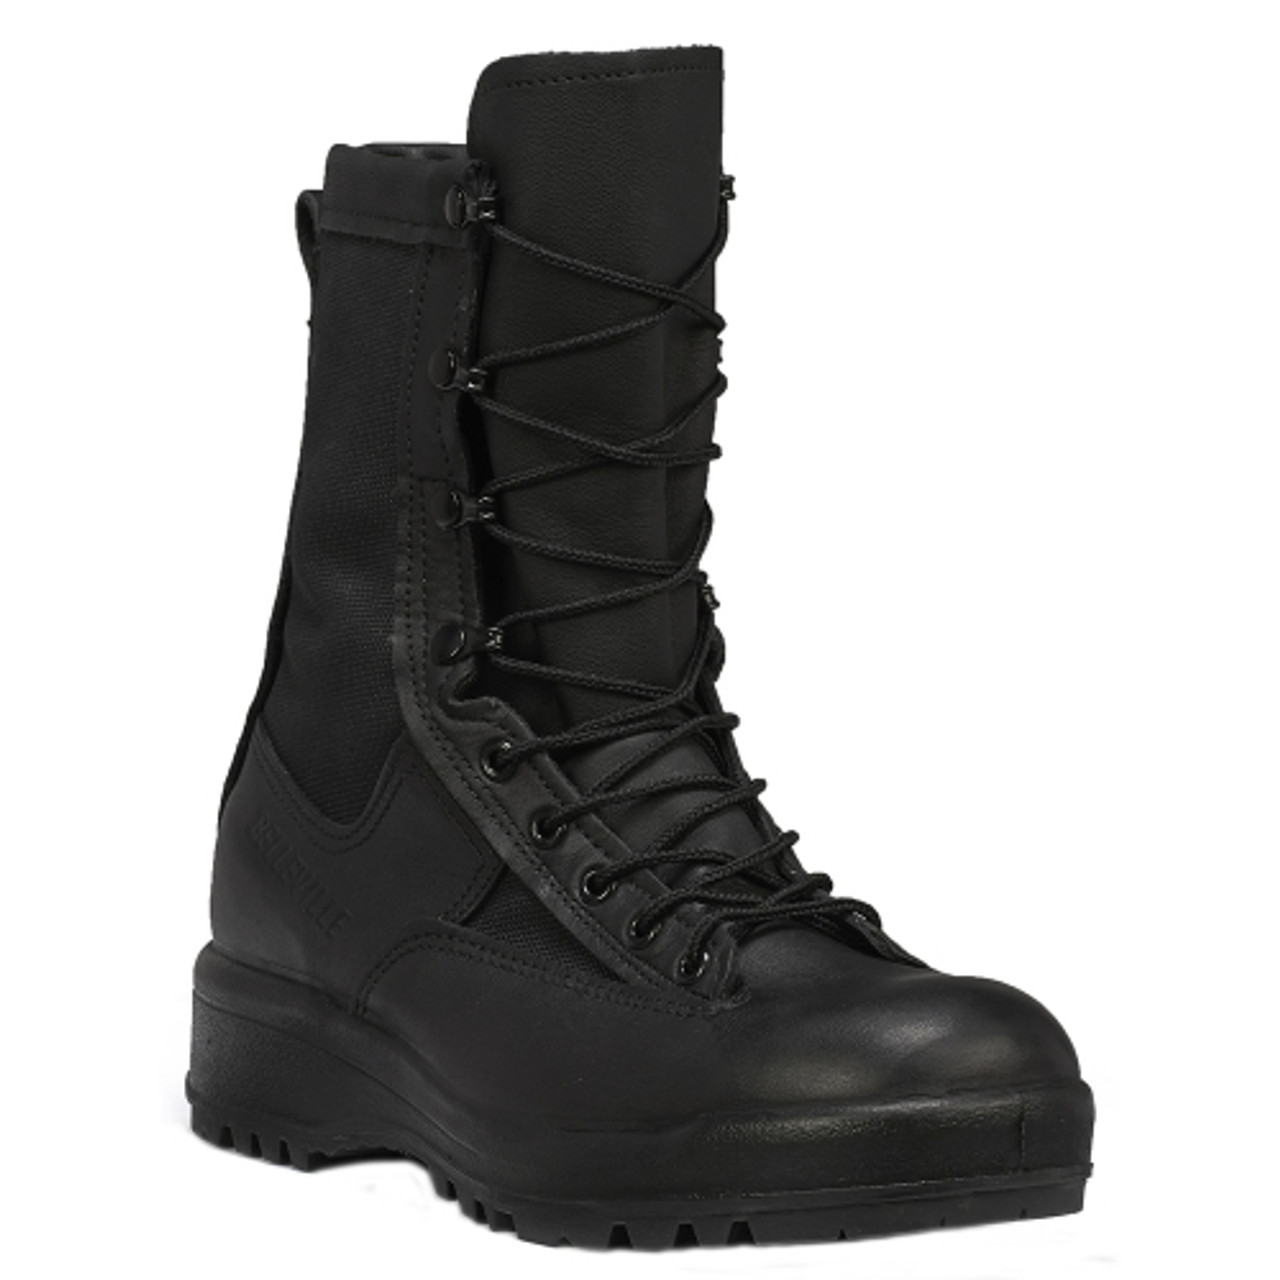 Belleville 200g Insulated Waterproof Combat and Flight Boot Black USA Made